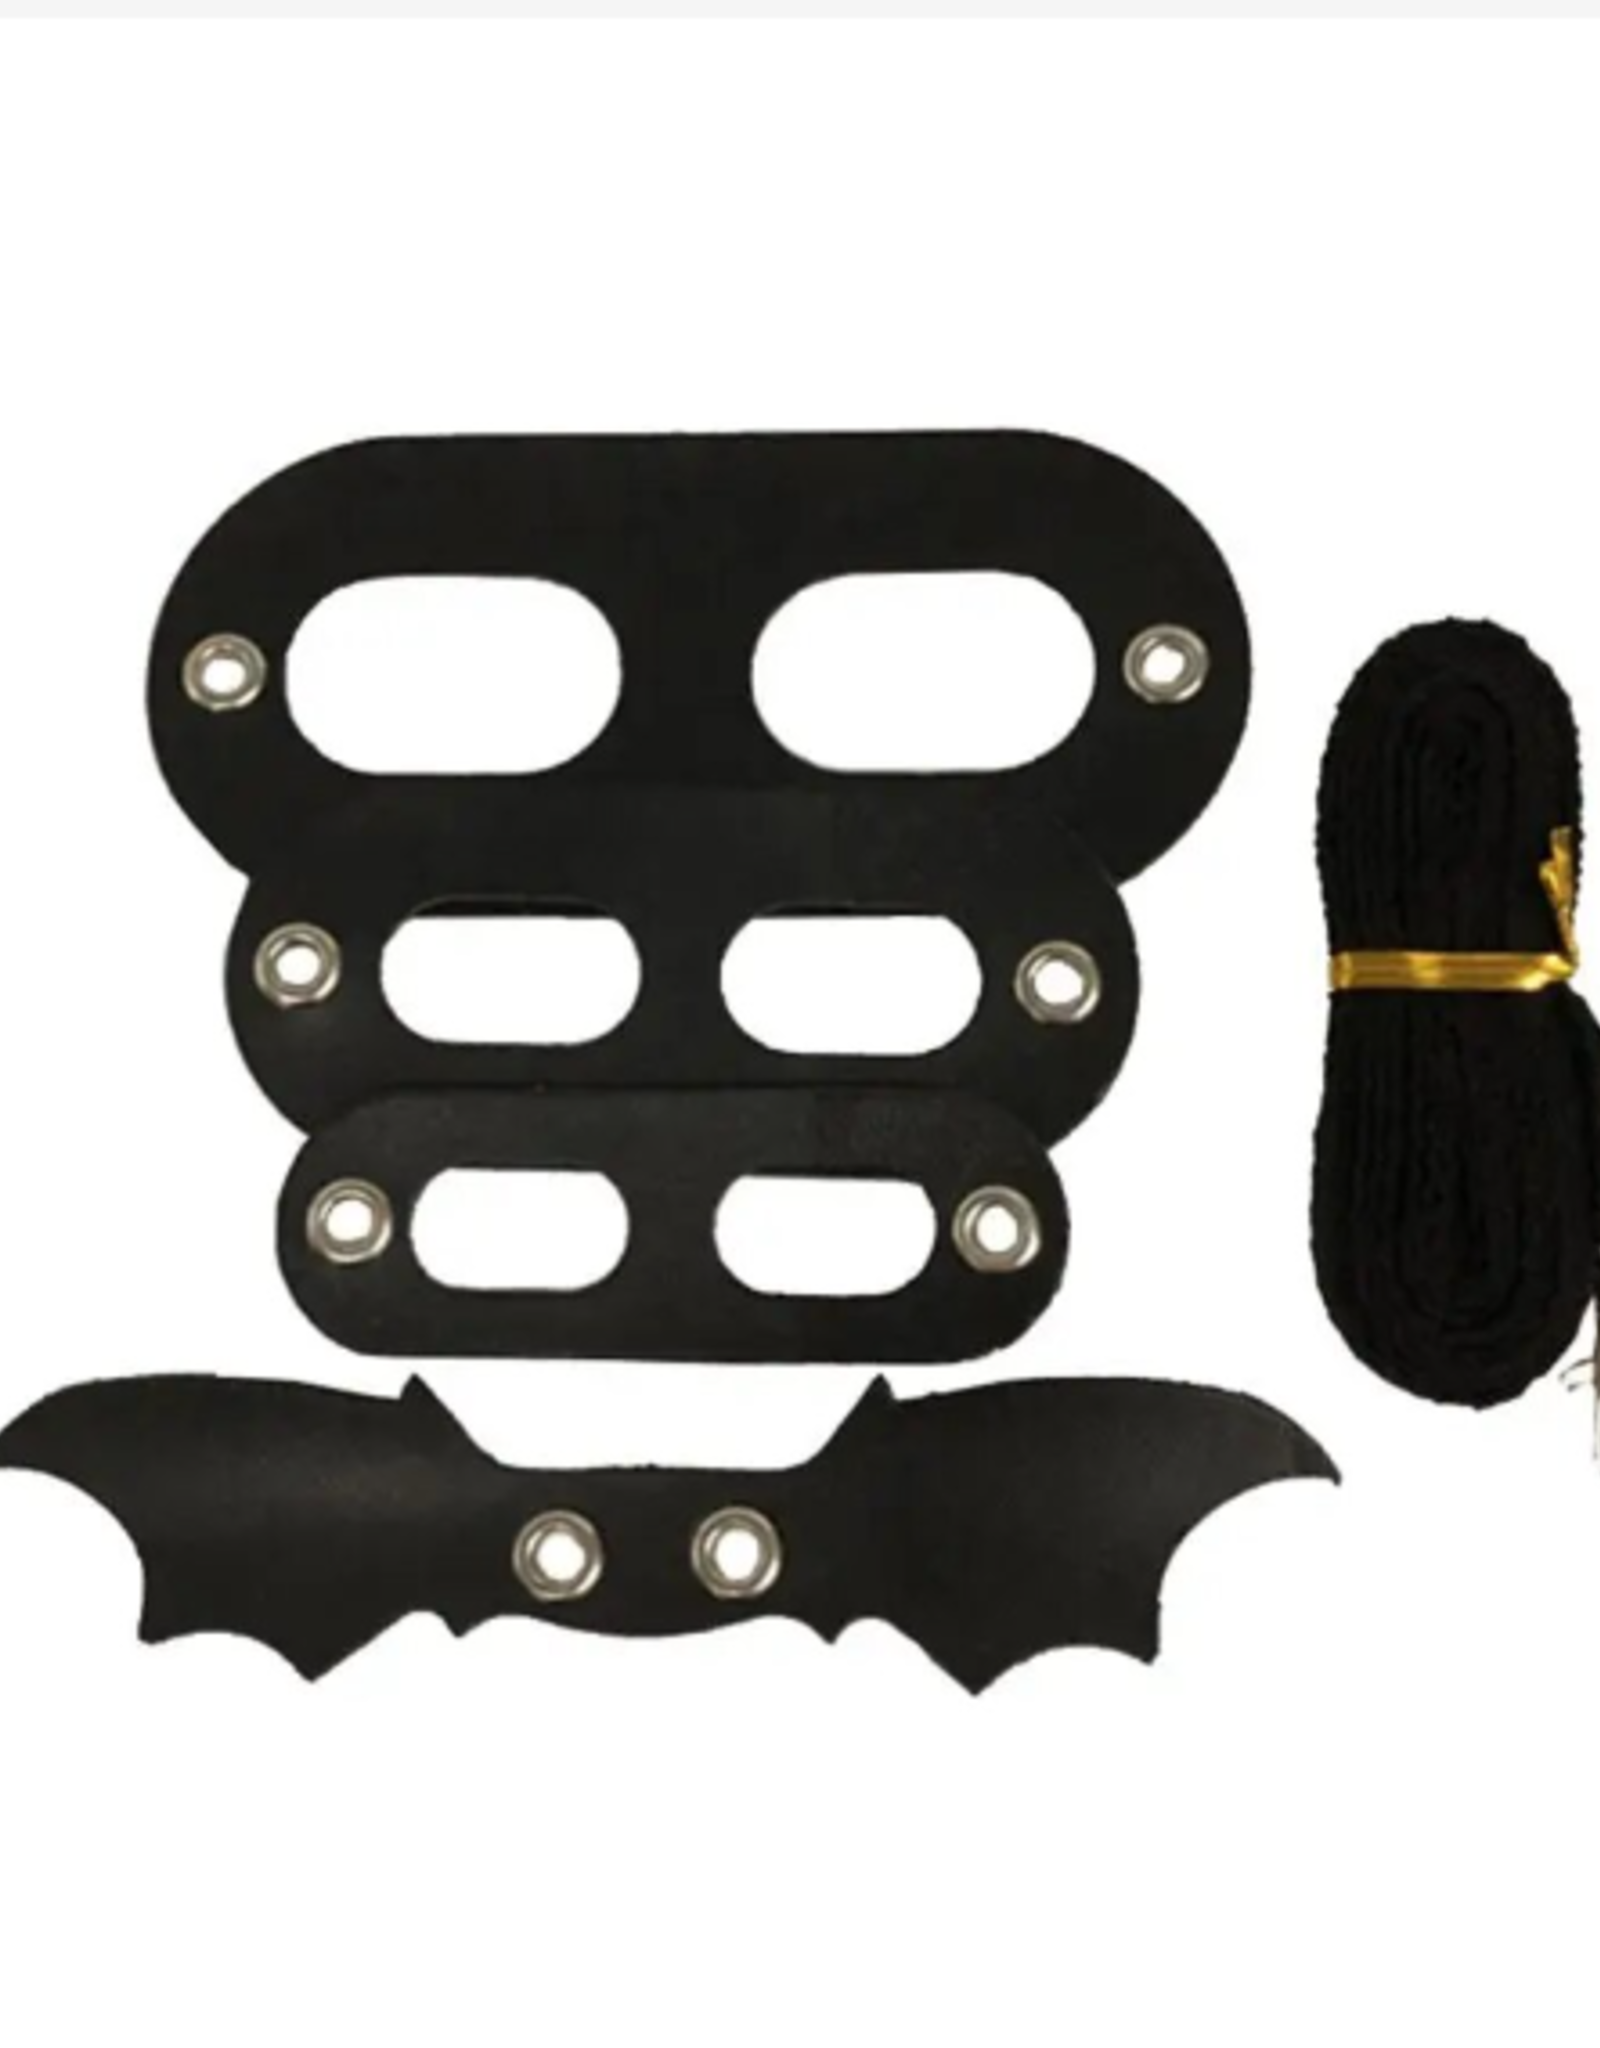 REPTILE ADJUSTABLE HARNESS/LEASH WITH WINGS- BLACK*THIS SET HAS 3 SIZES